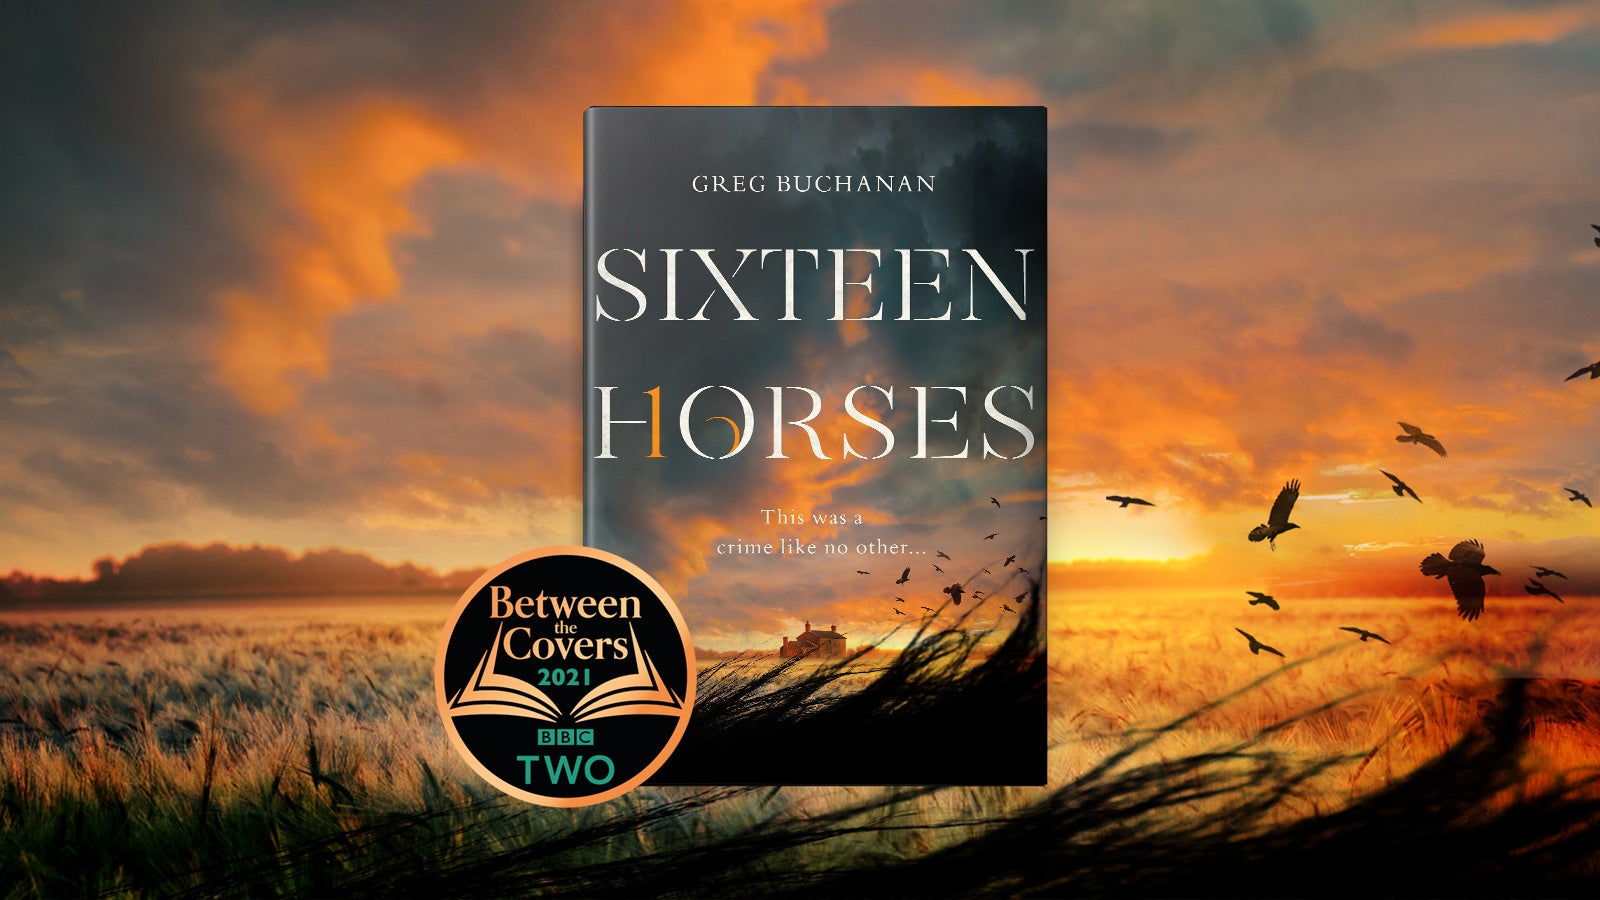 The book cover for Sixteen Horses showing a remote house in the countryside at sunset